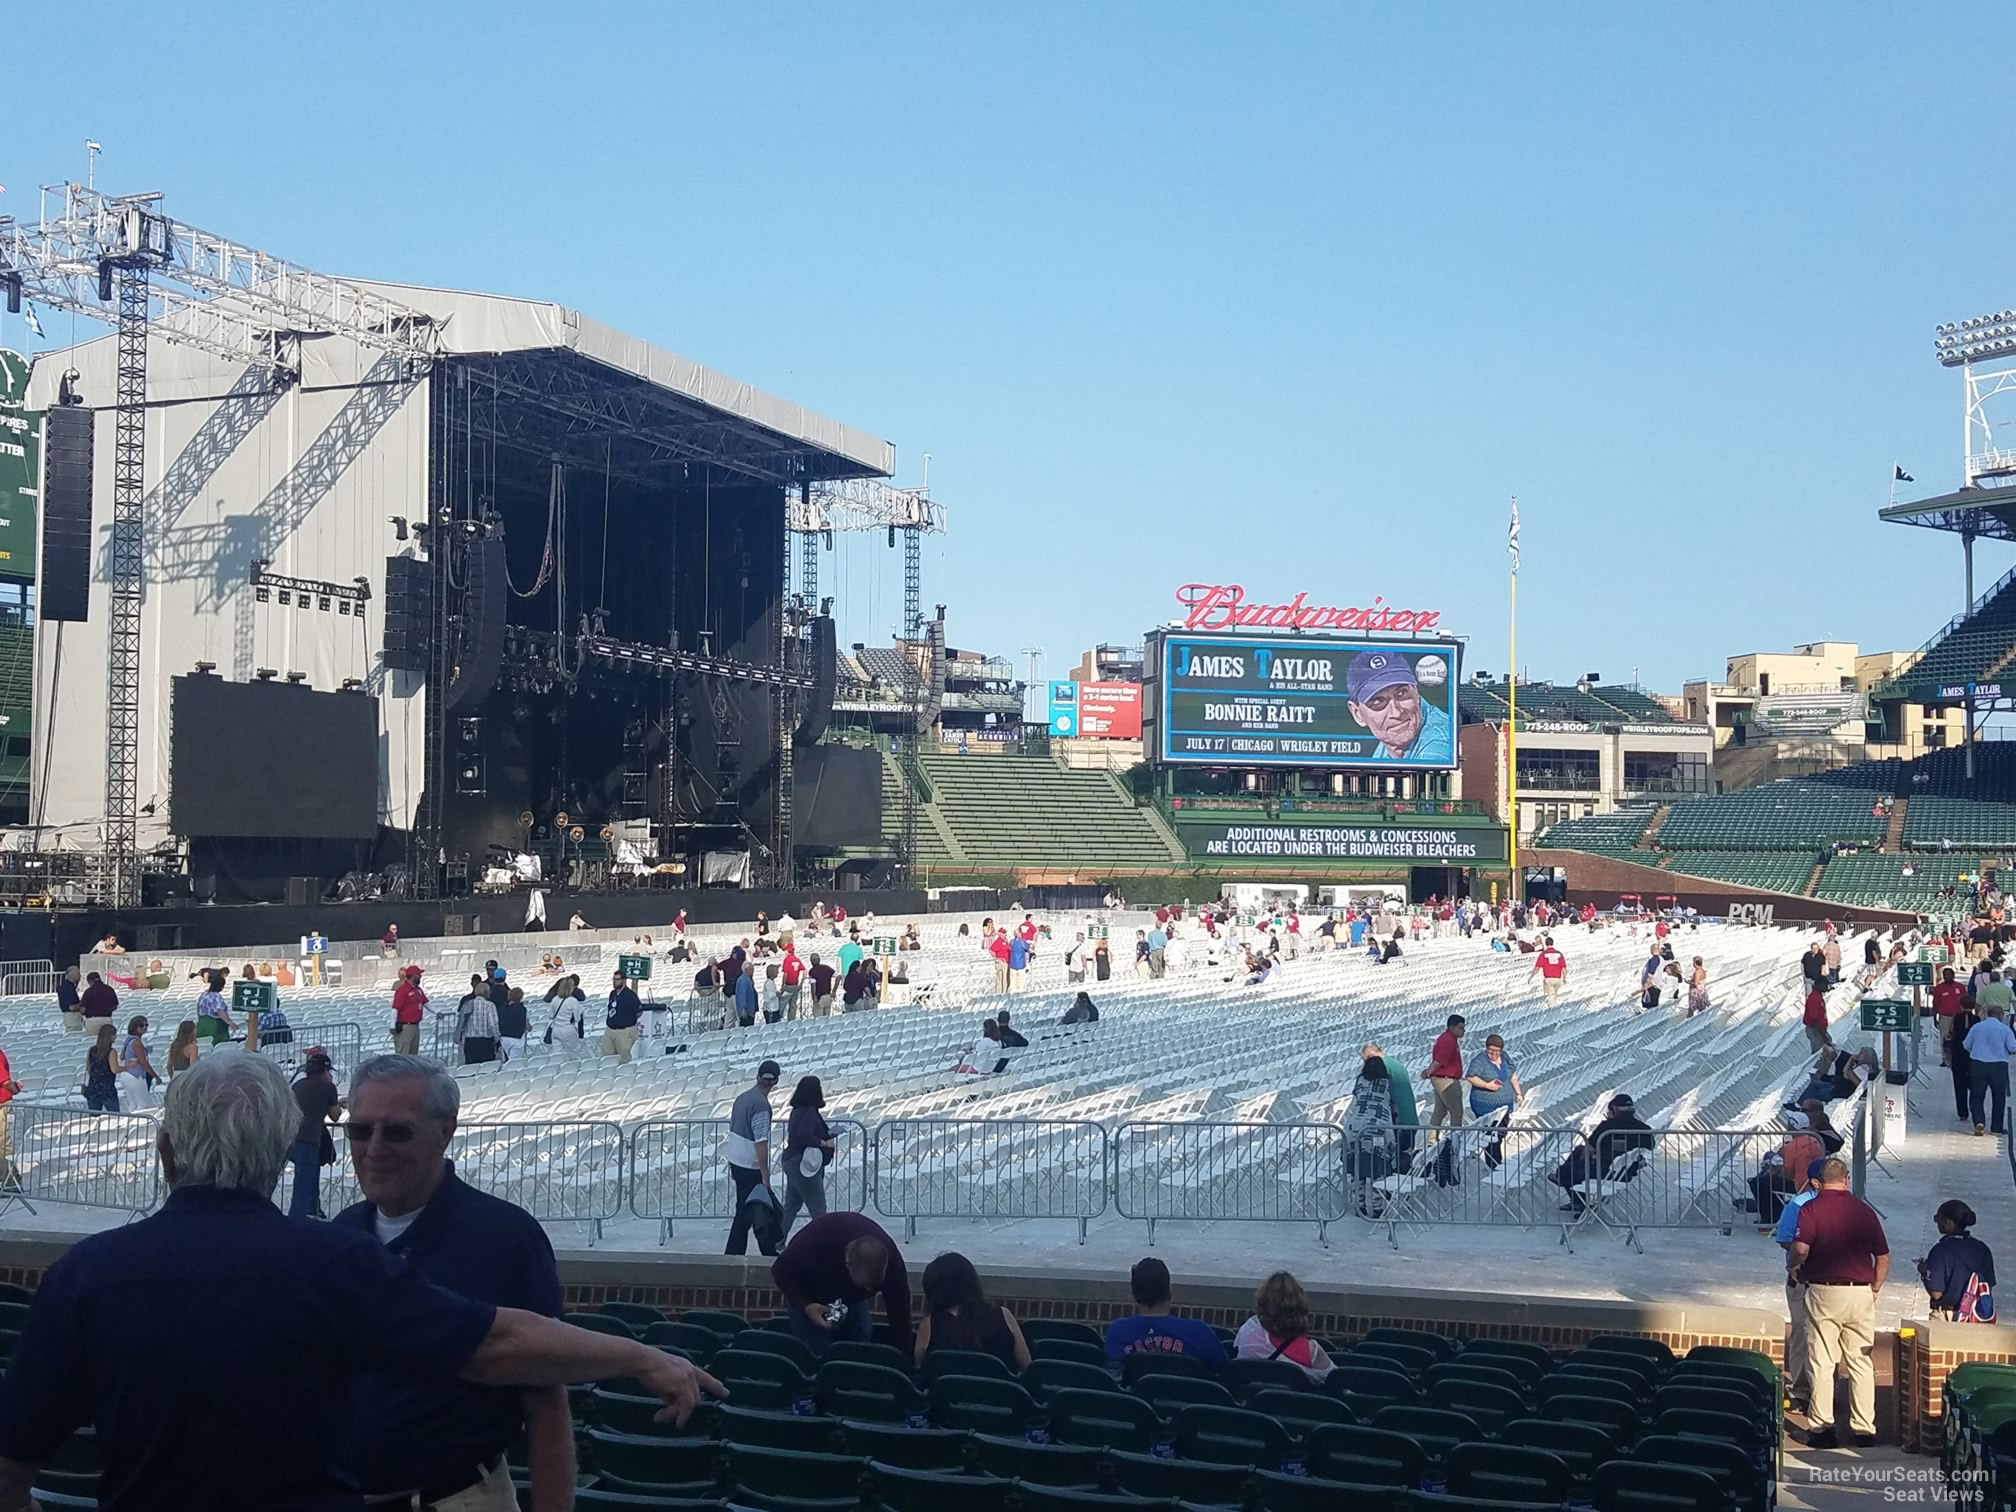 Section 103 at Wrigley Field for Concerts